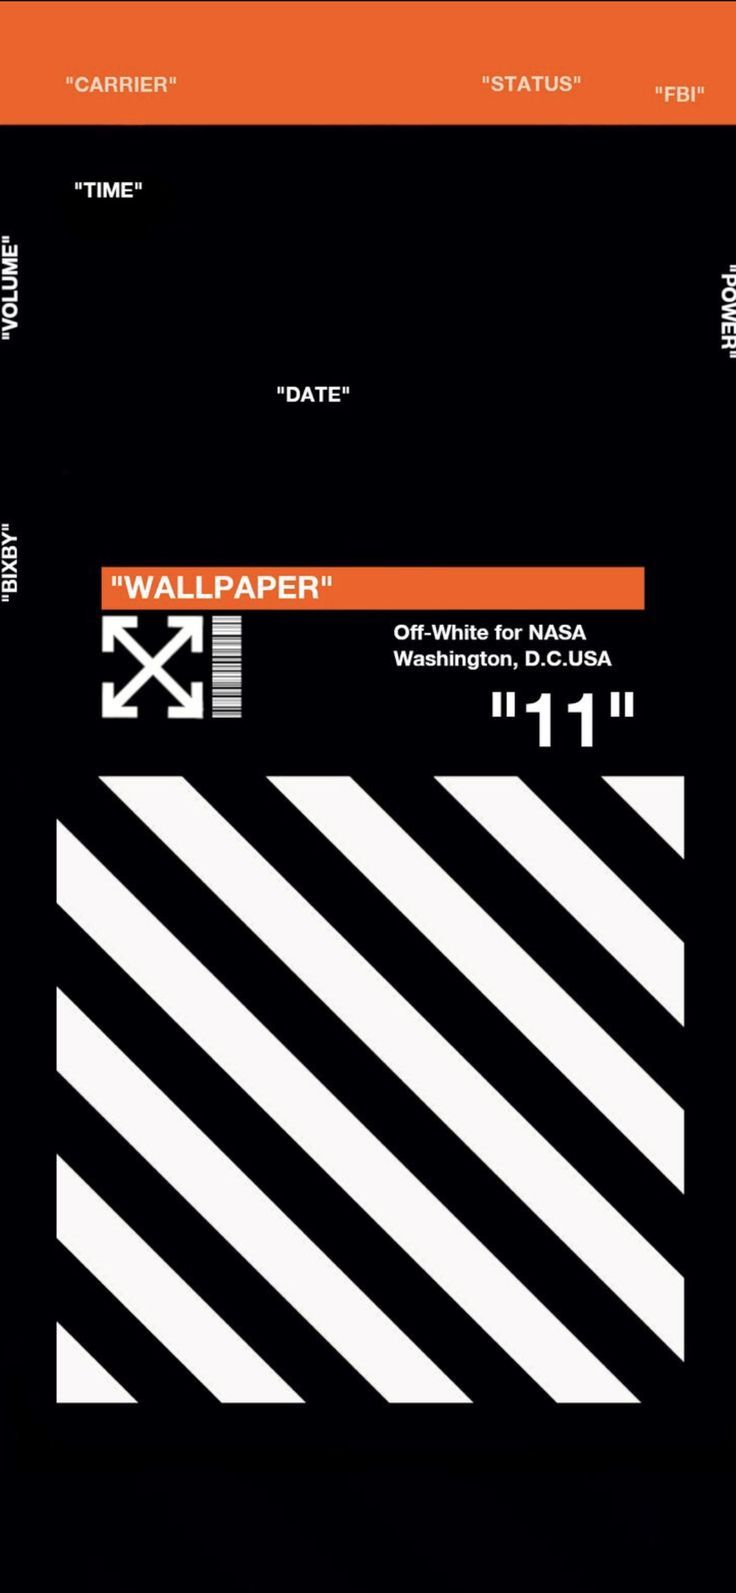 Off White. Hype Wallpaper, Hypebeast Iphone Wallpaper, Hypebeast Wallpaper